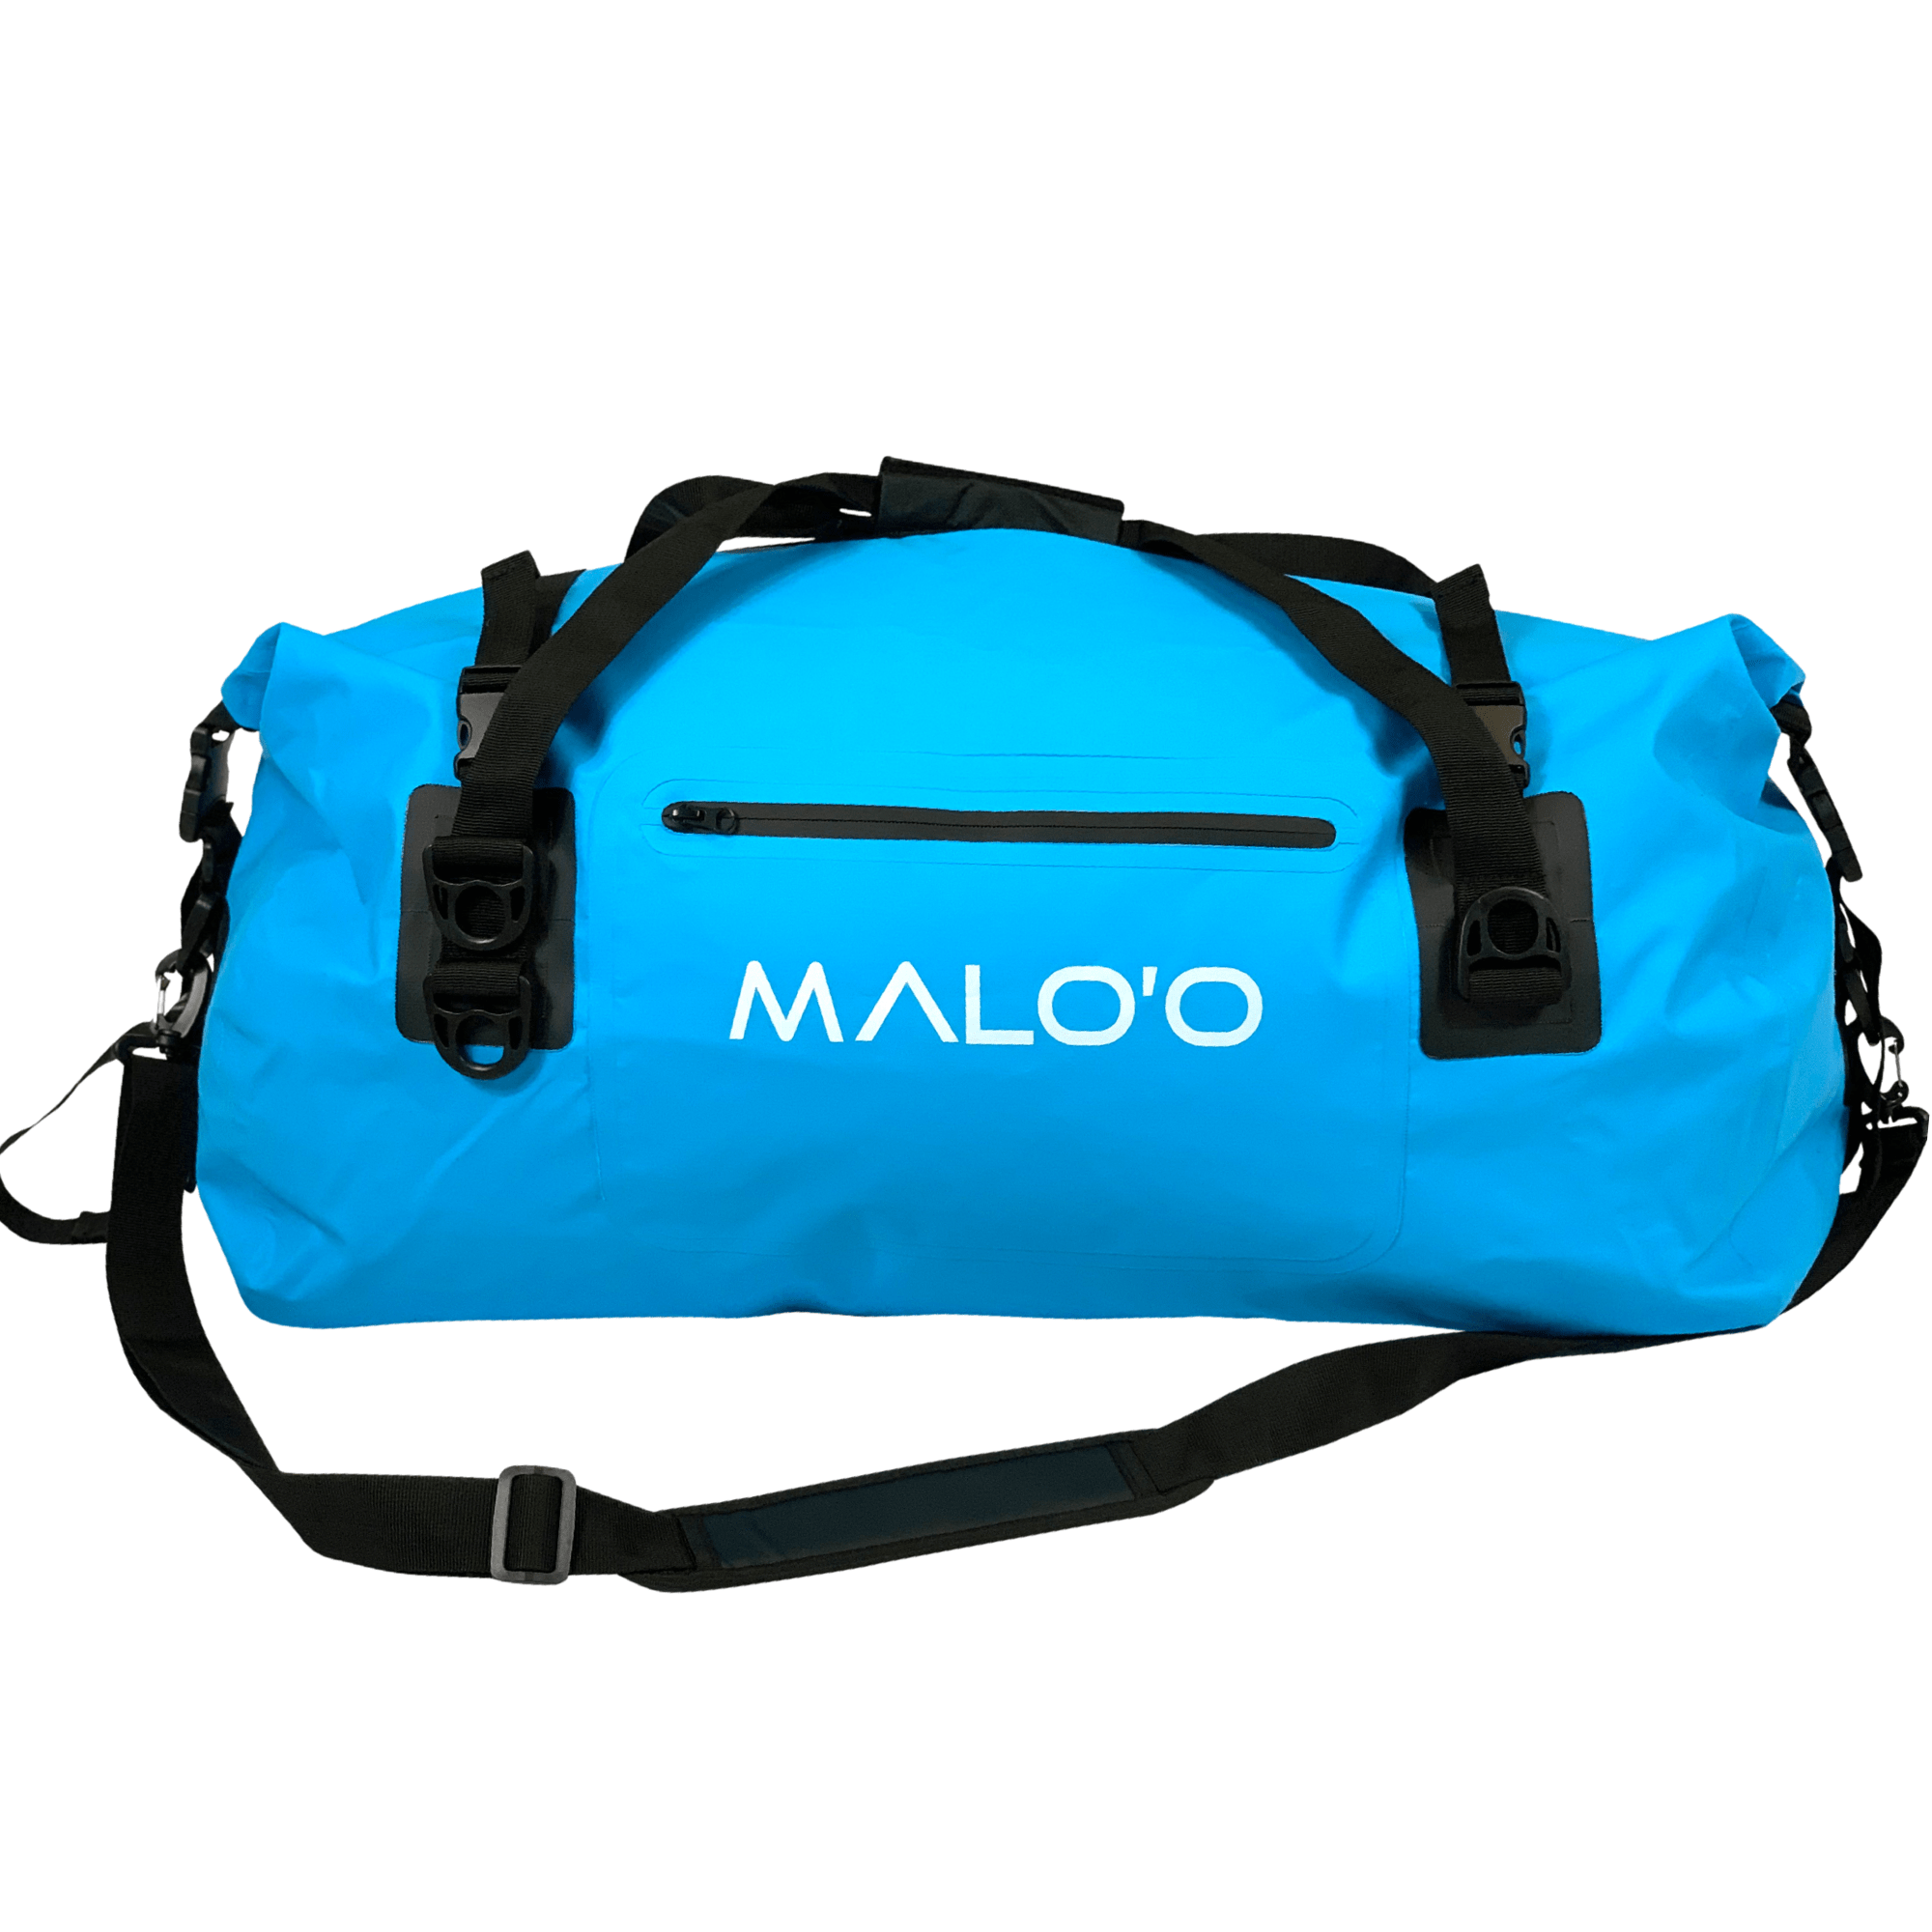 Malo'o Roll Top Duffle Blue / X-Large-60 Liter Malo'o DryPack Roll Top Duffle Bag